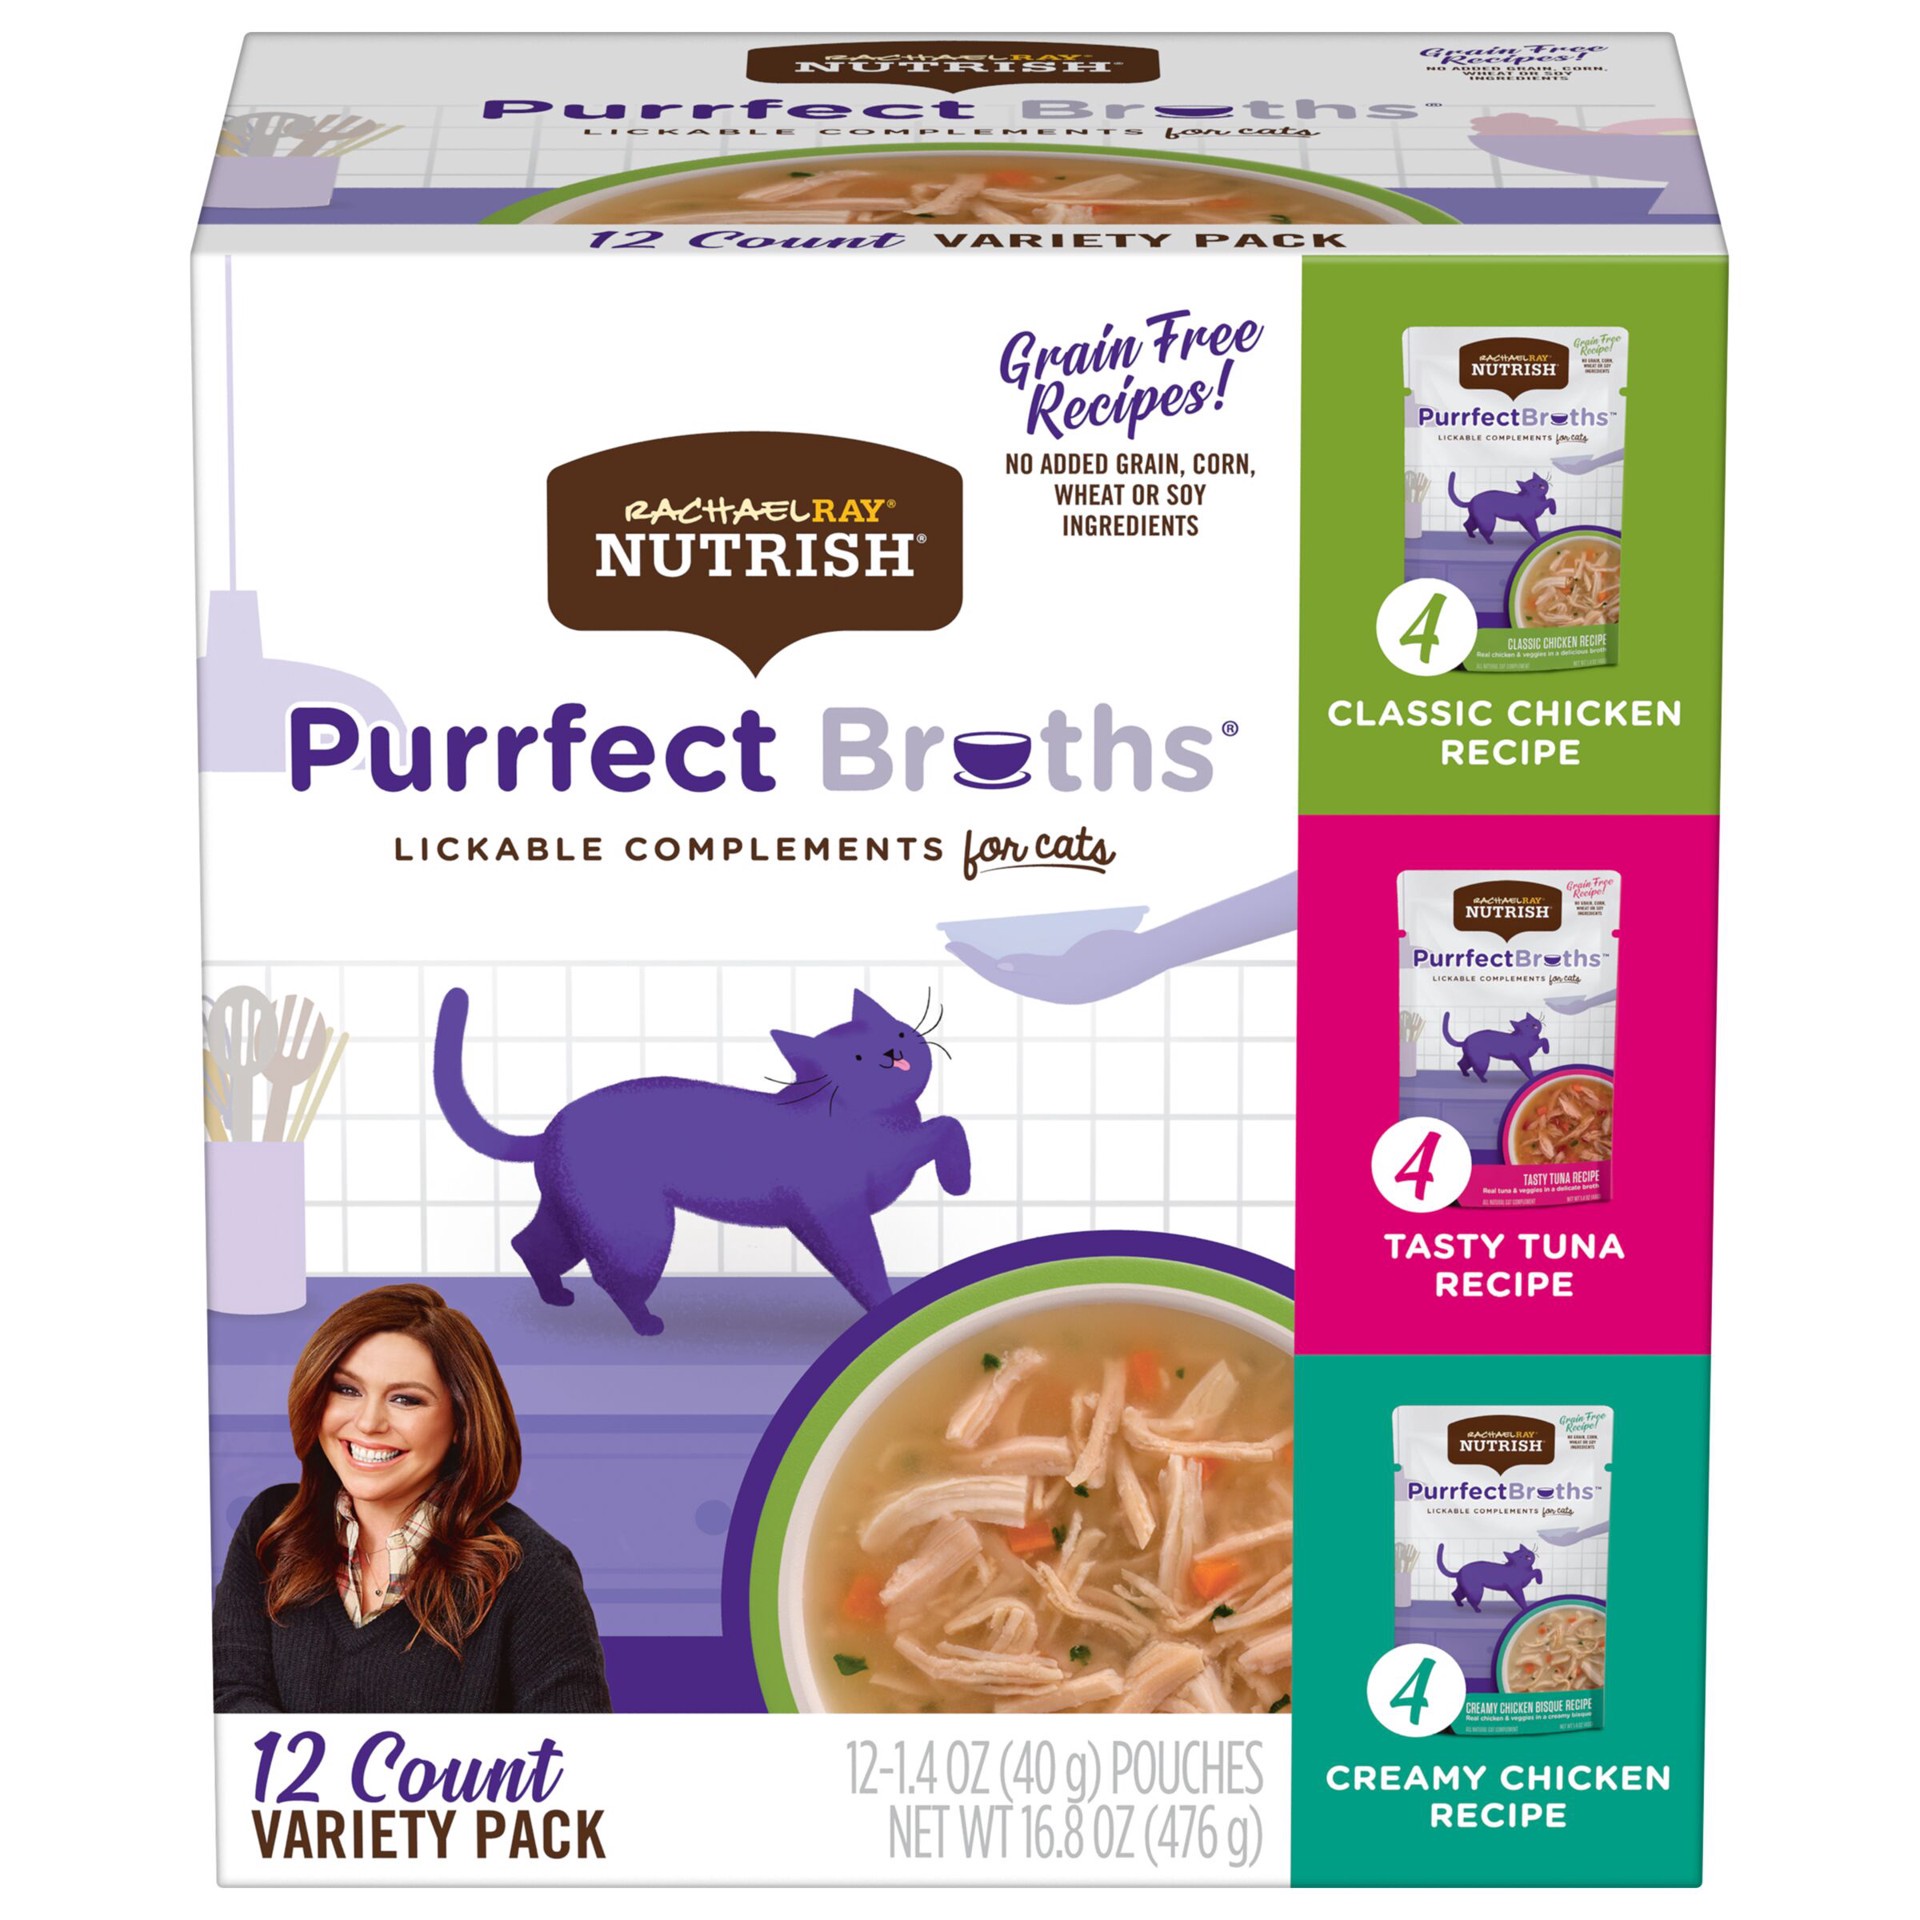 slide 1 of 8, Rachael Ray Nutrish Purrfect Broths Variety Pack, Lickable Complements for Cats, 1.4 oz. Pouch, 12 Count, 16.8 oz